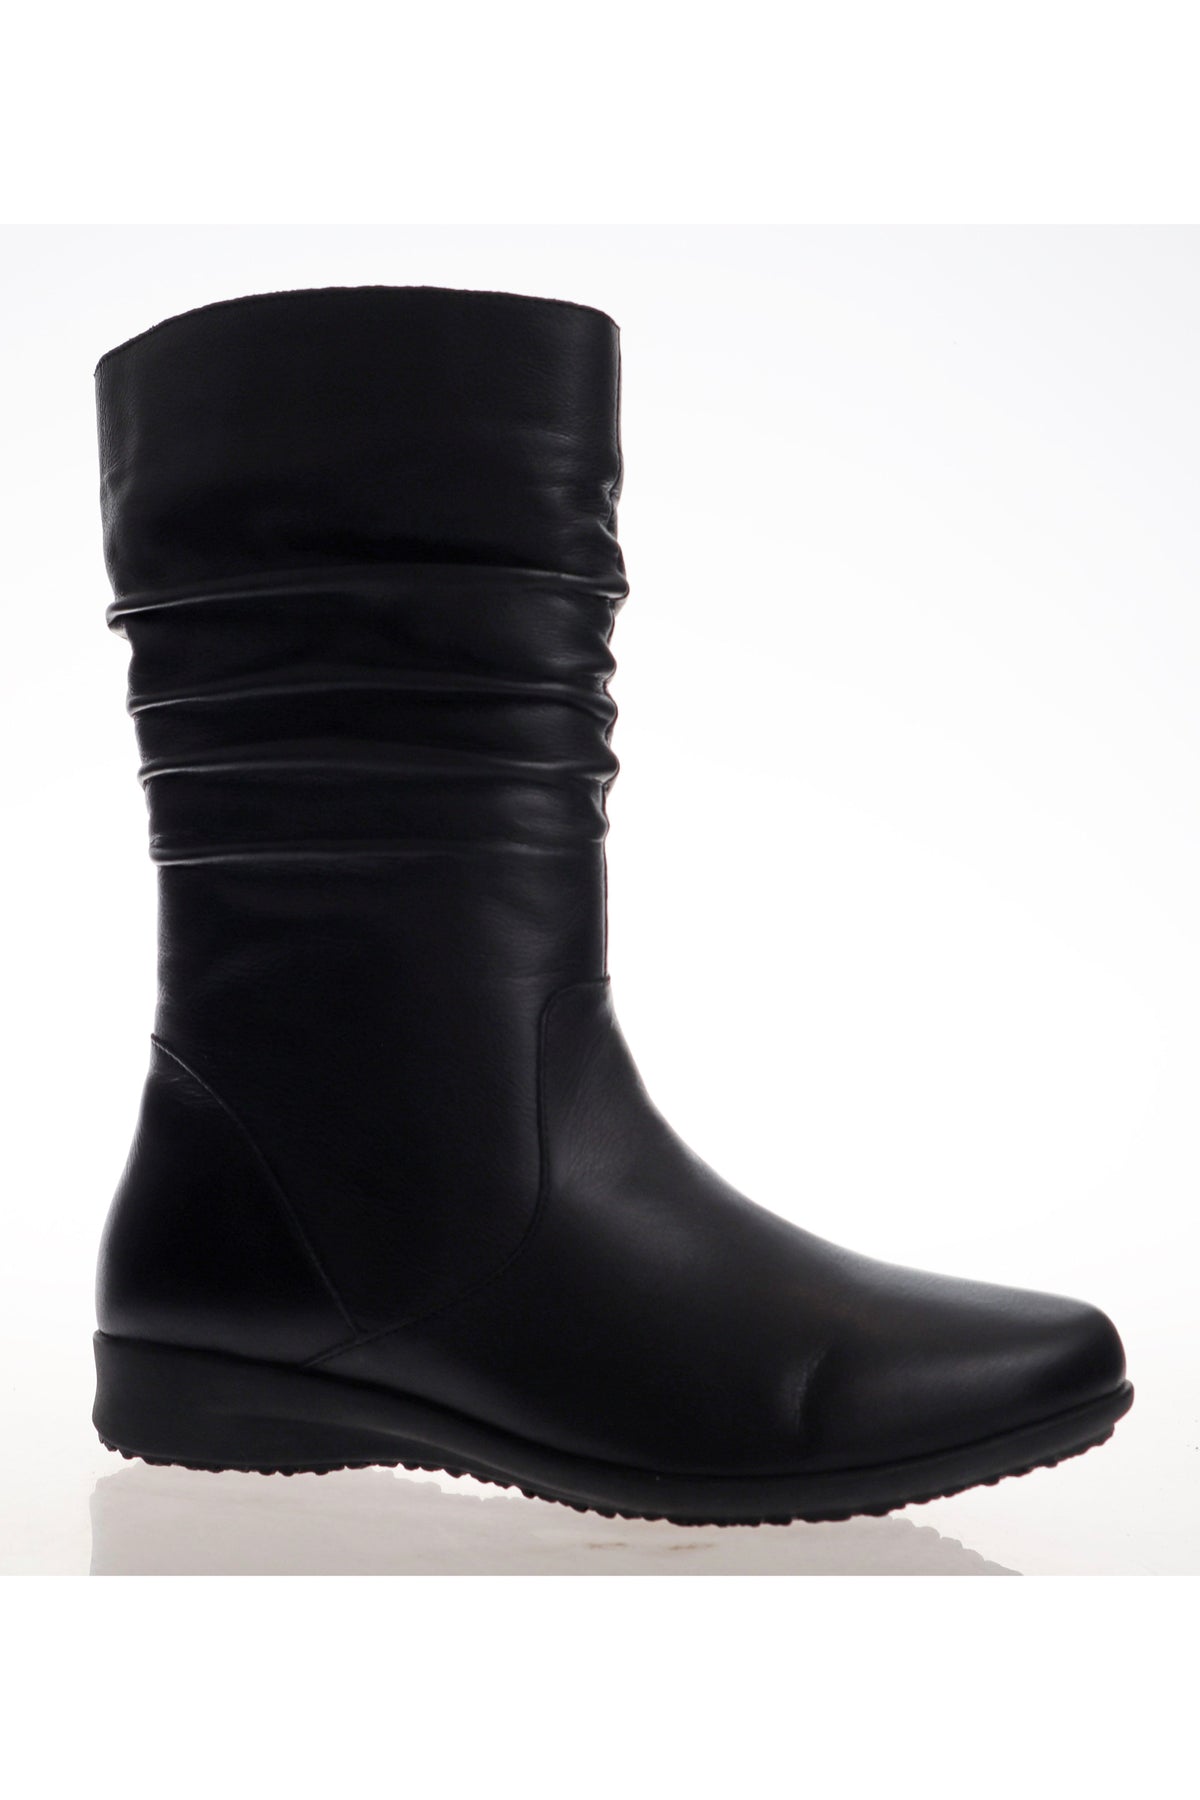 Carrie Boot Black